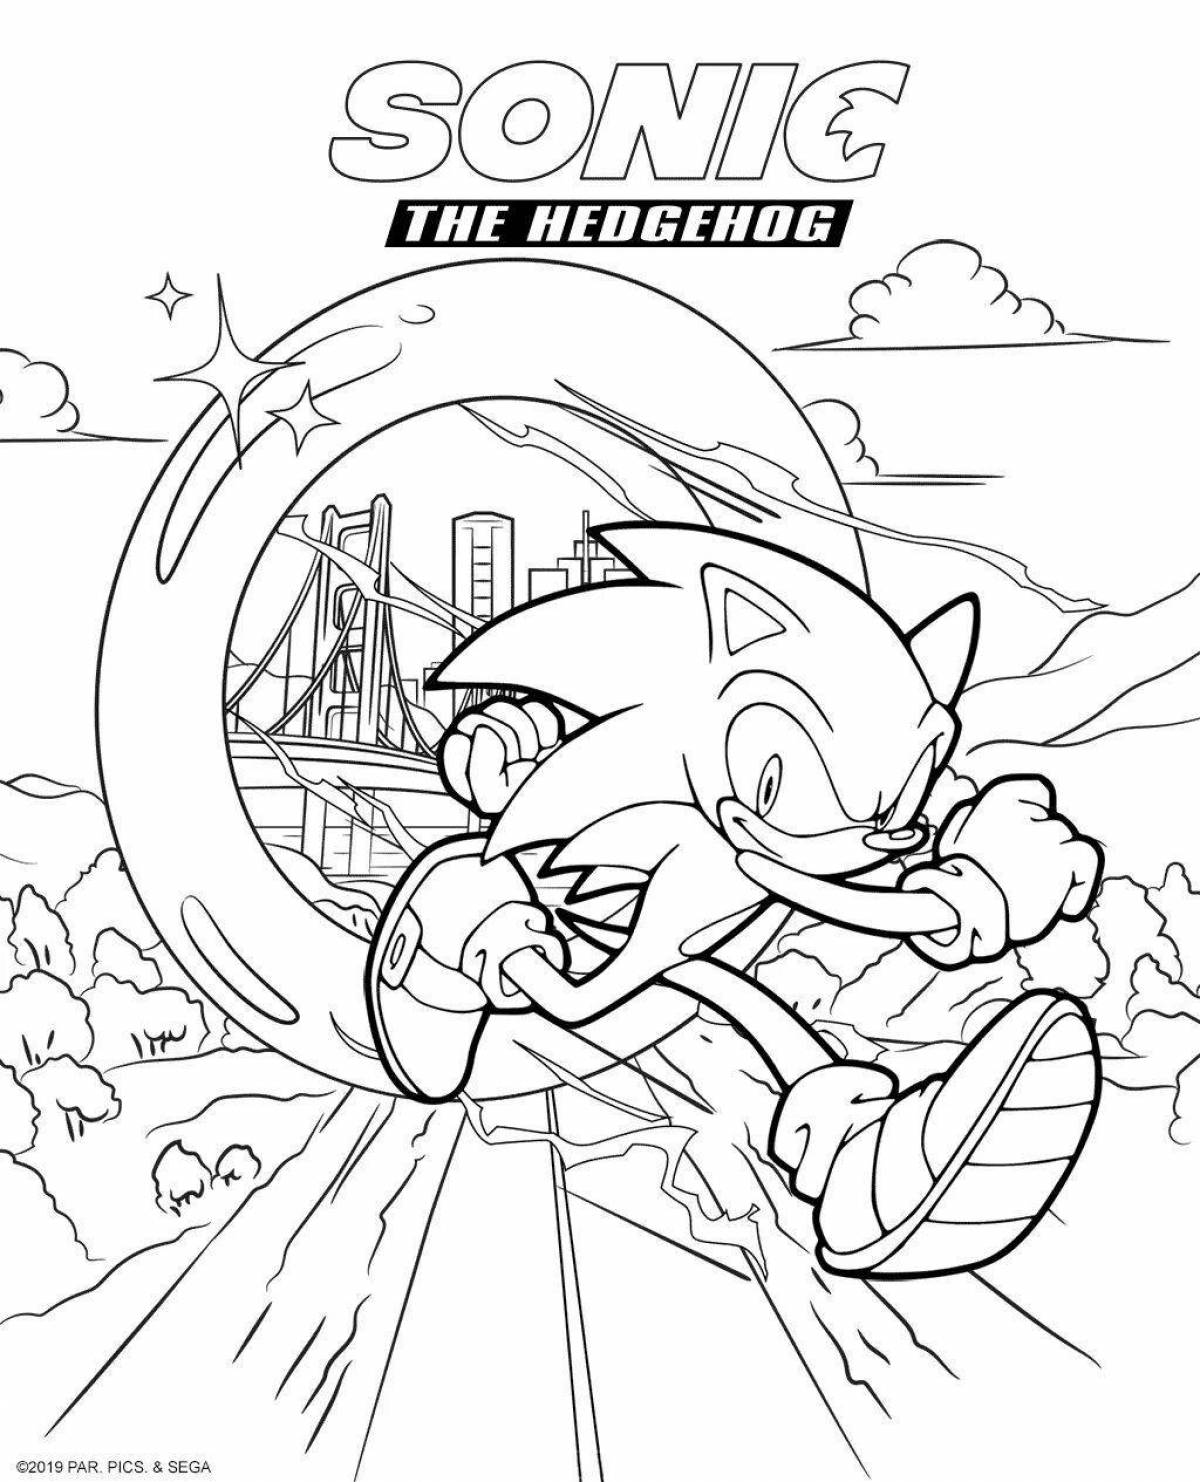 Playful sonic monster coloring book